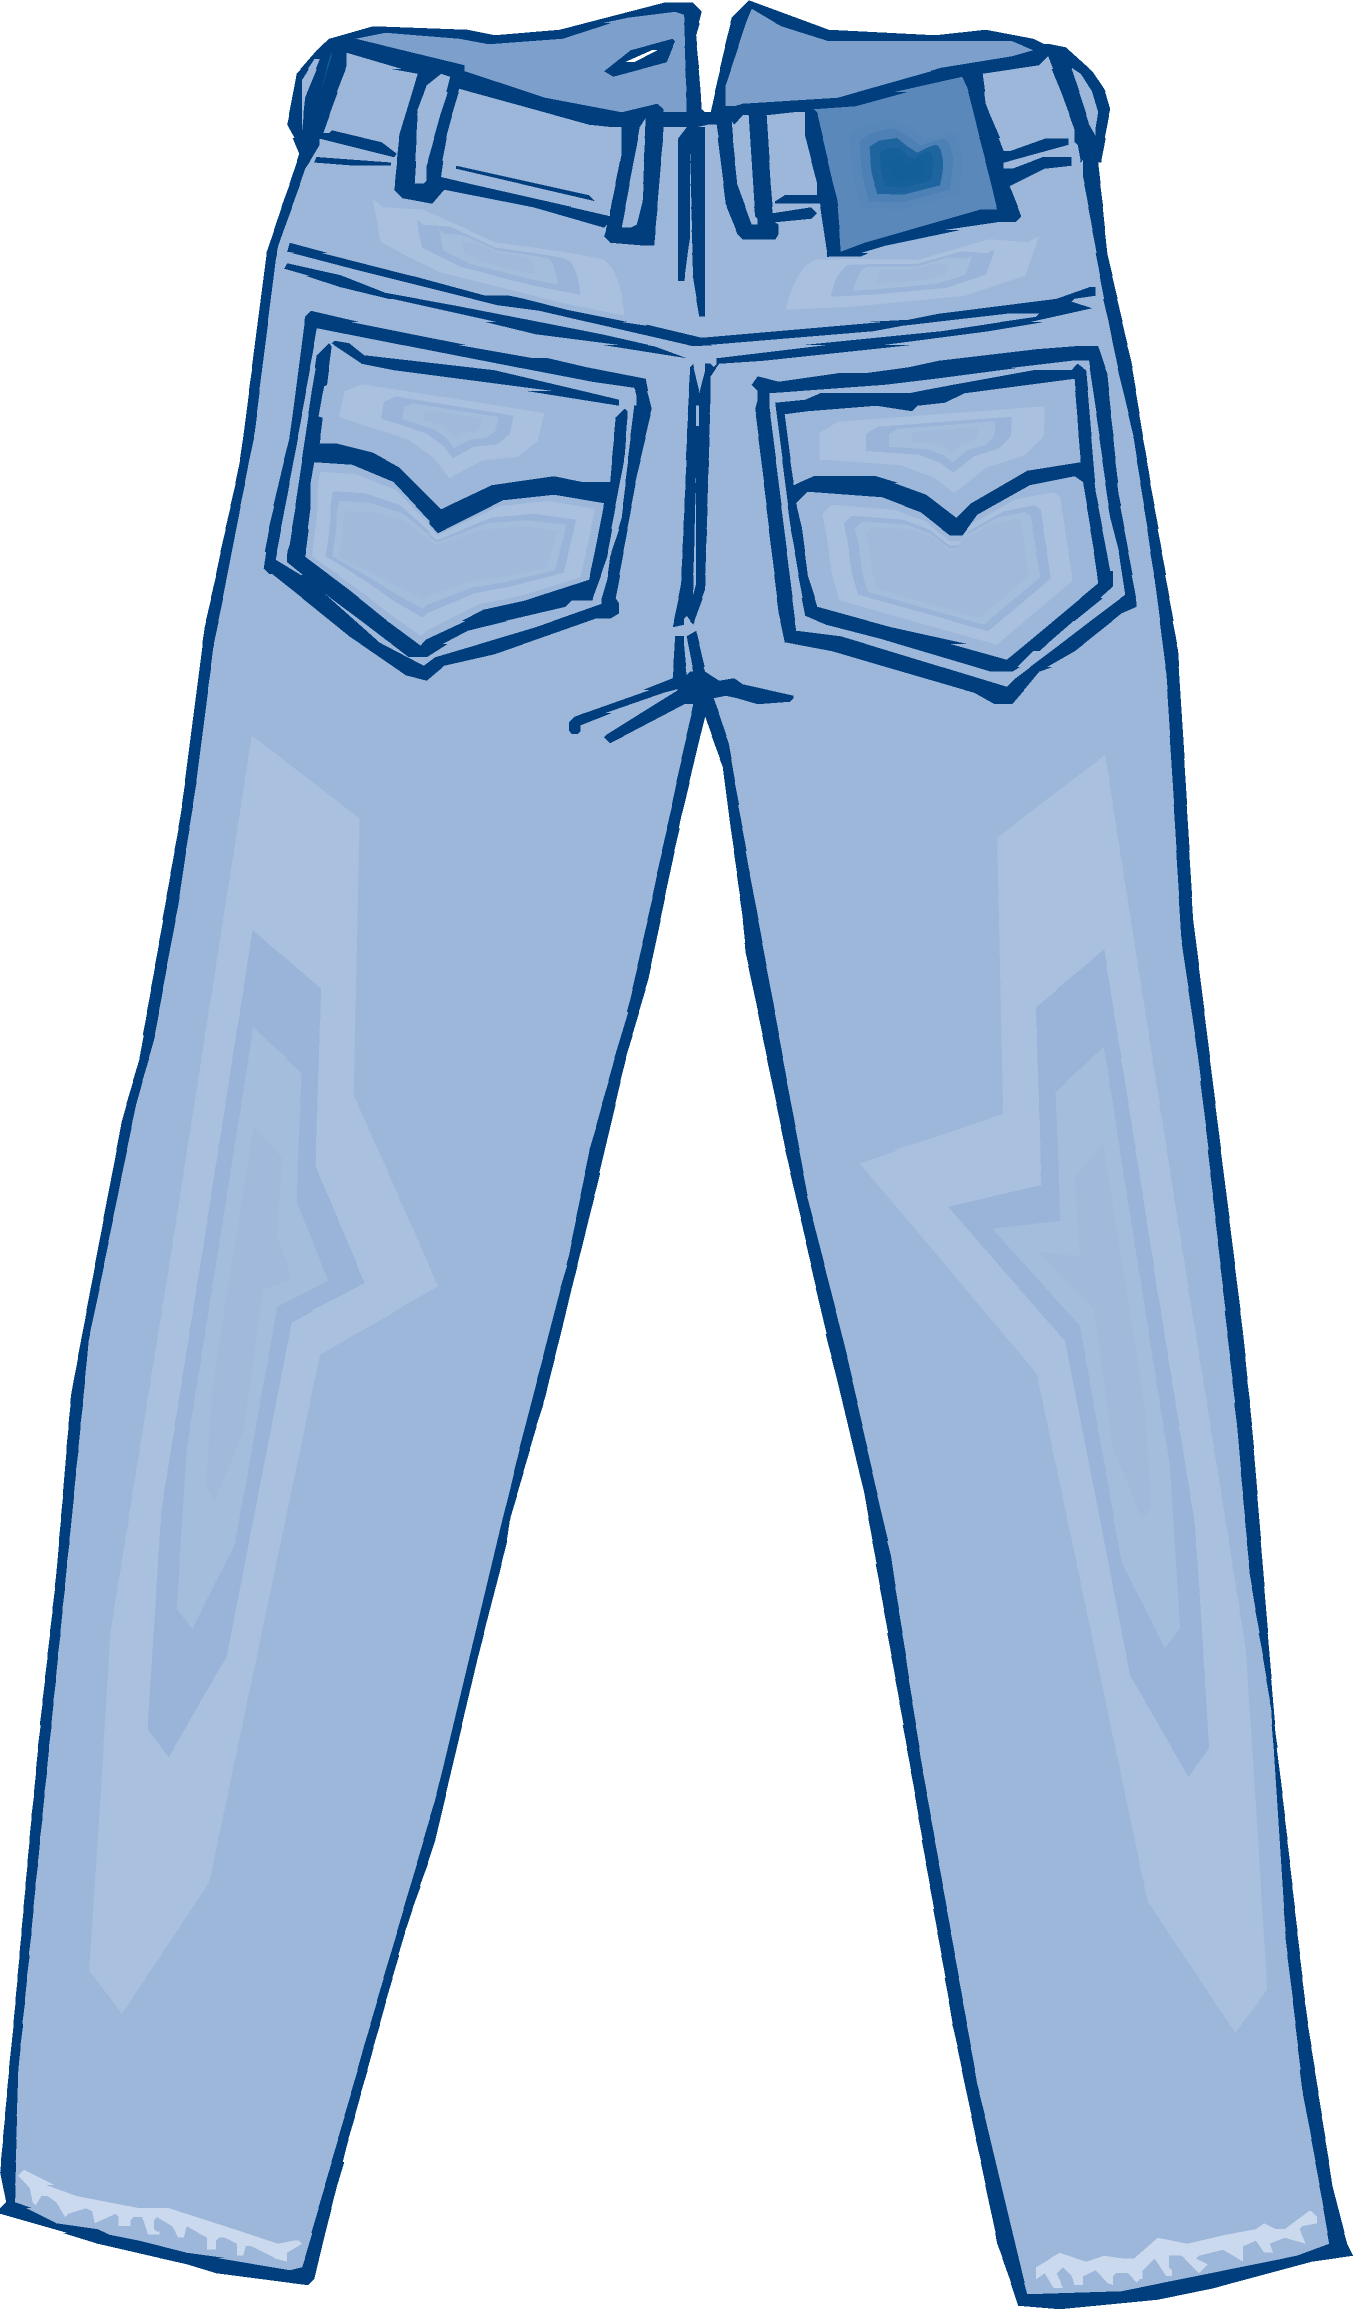 free clipart of jeans - photo #12